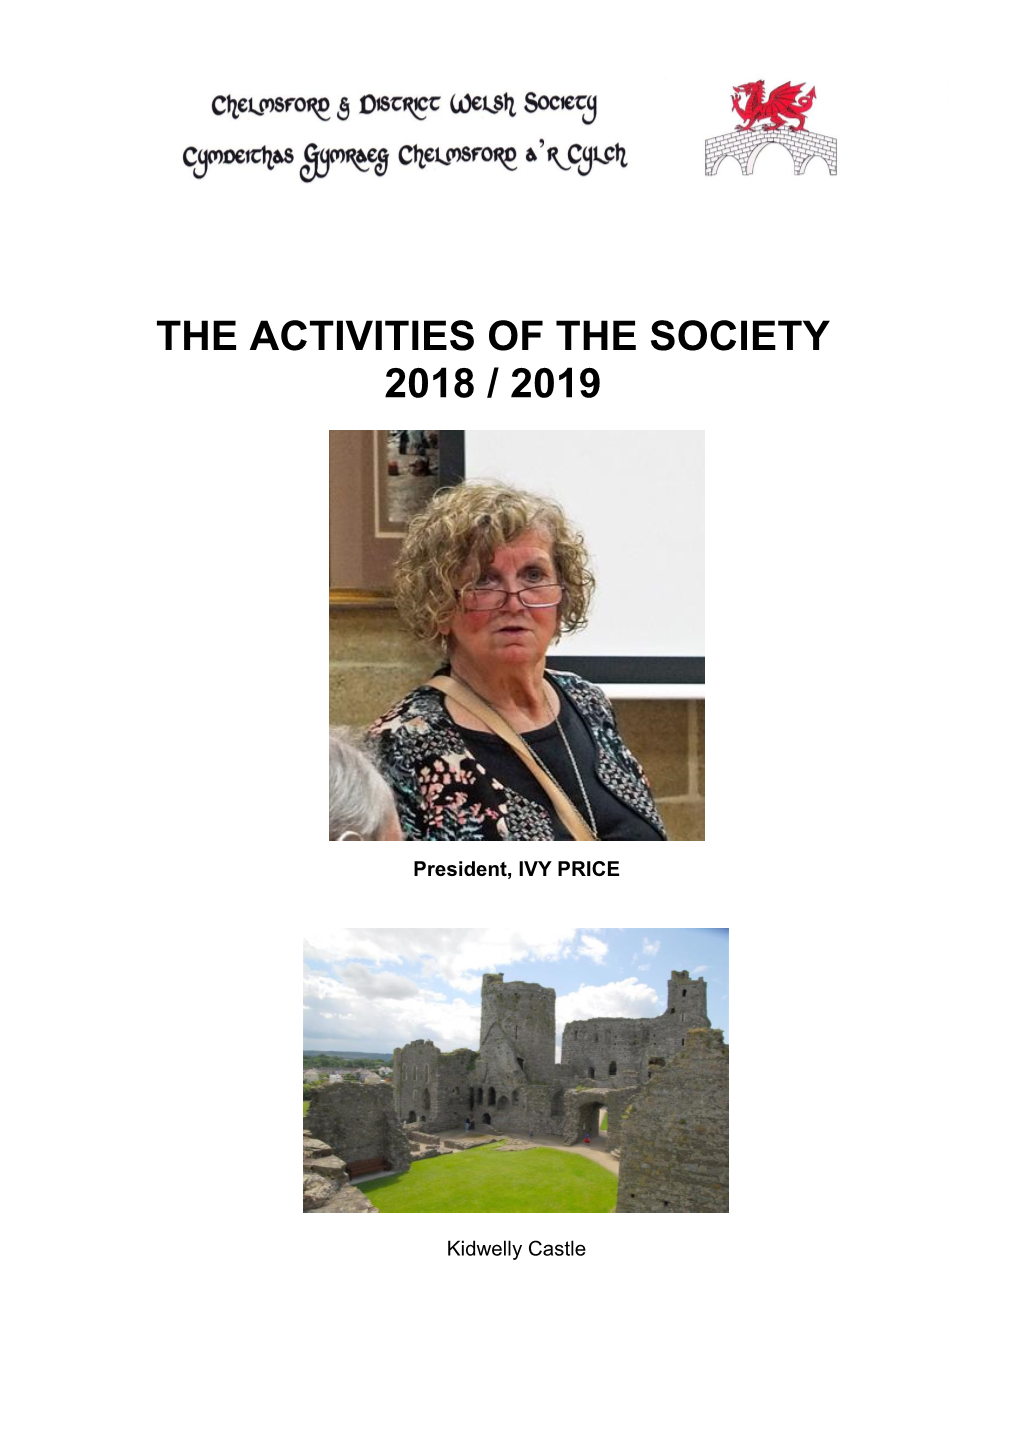 Report on the Activities in 2018/2019